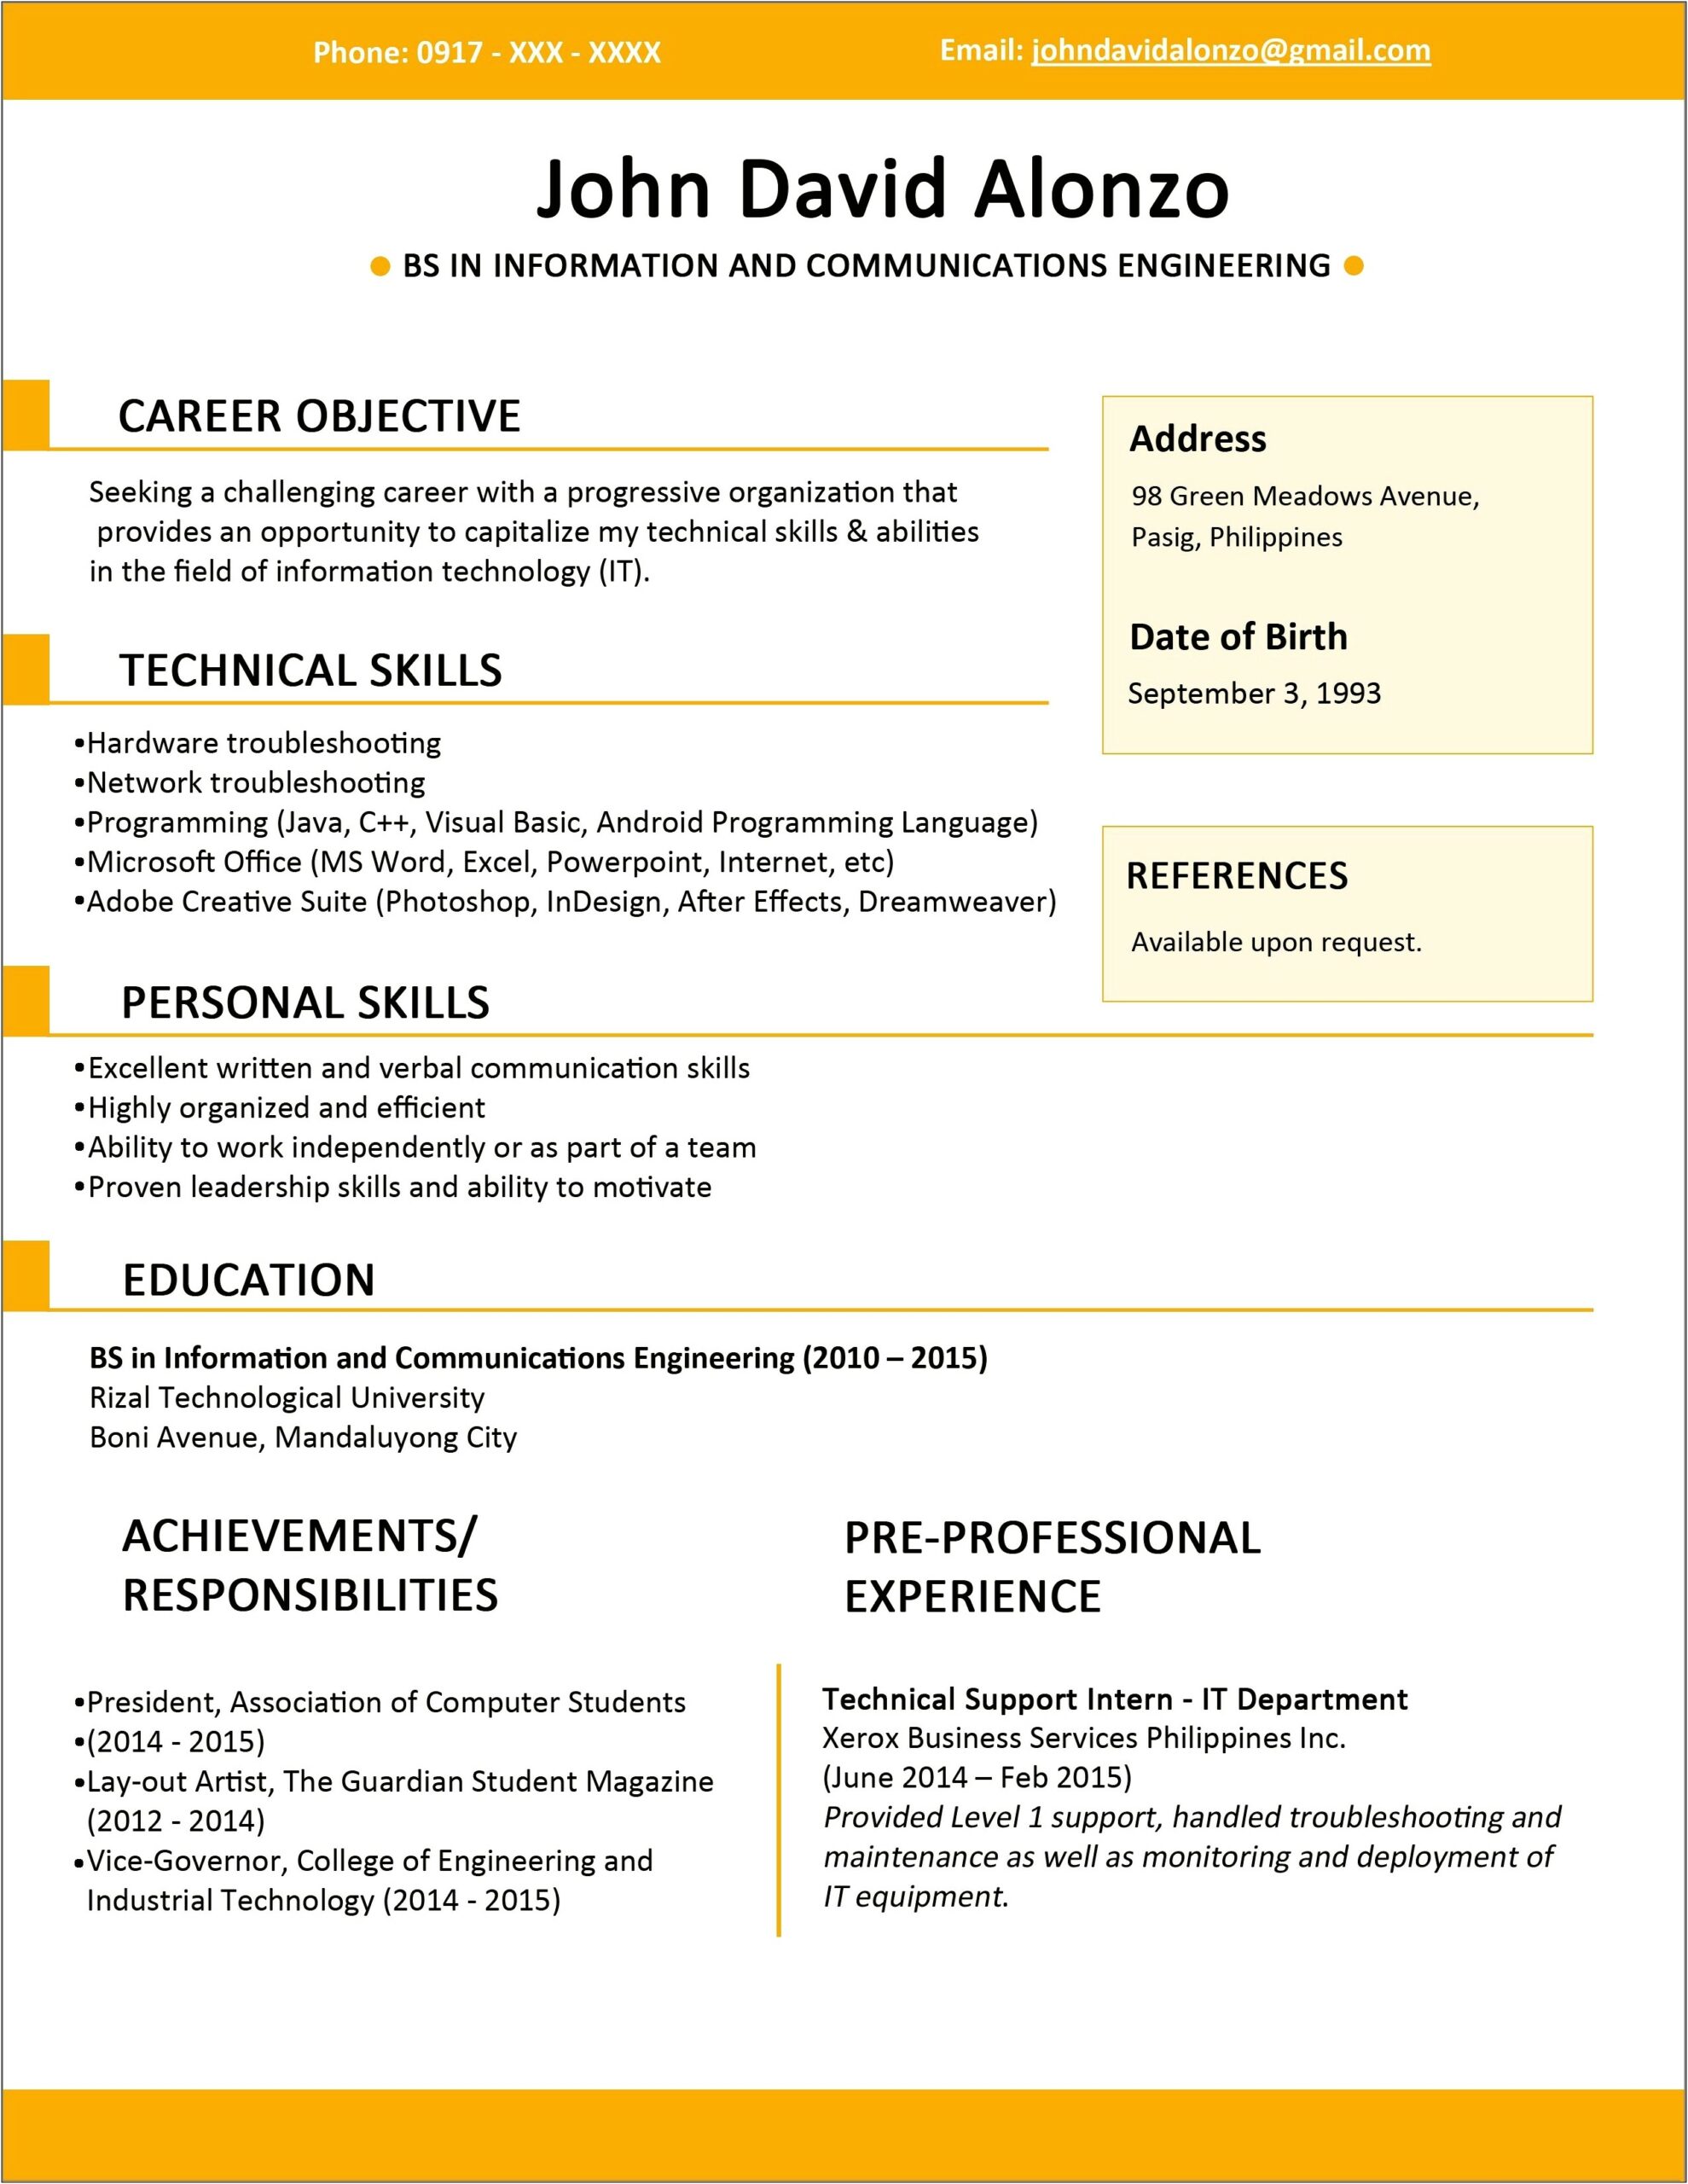 Create Your Resume Online Free